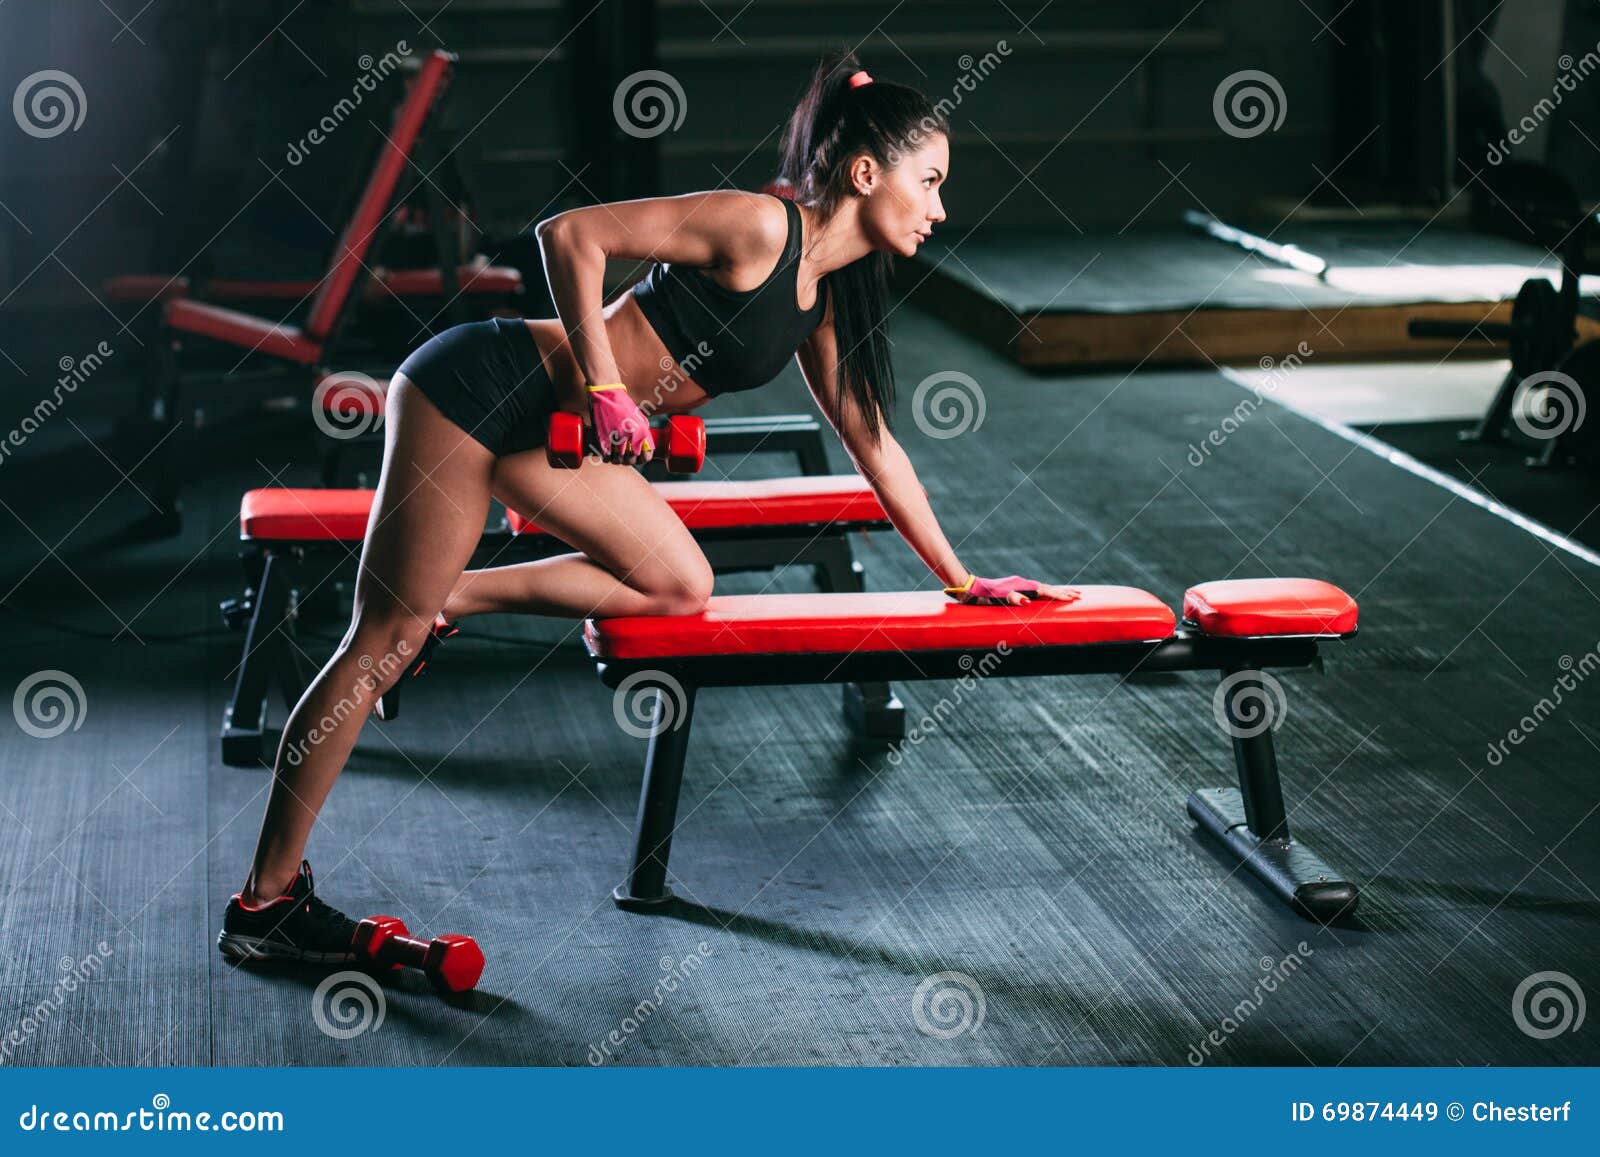 Woman Exercising Dumbbell Row At The Gym Stock Image Image Of Healthy Sport 69874449